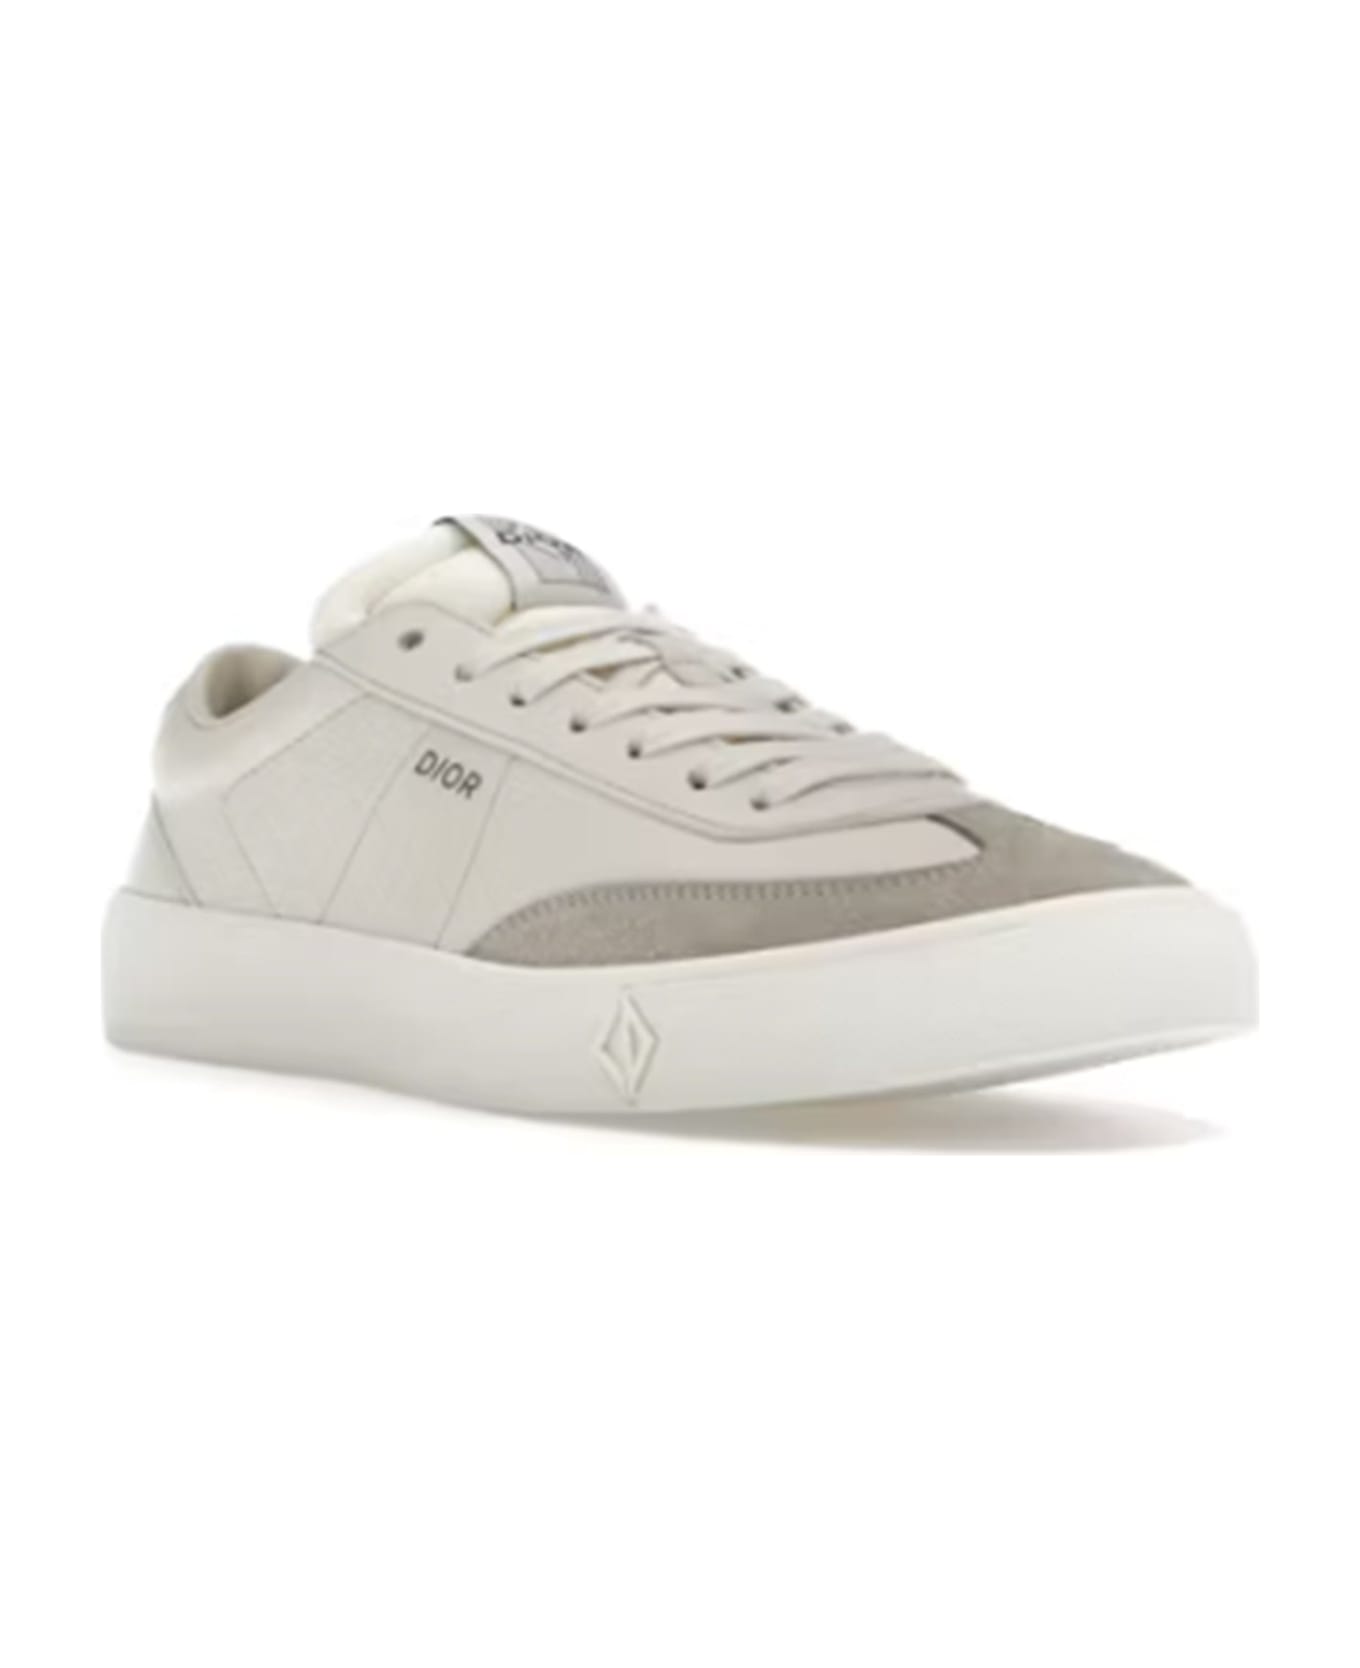 Dior B101 Leather Sneakers - Gray